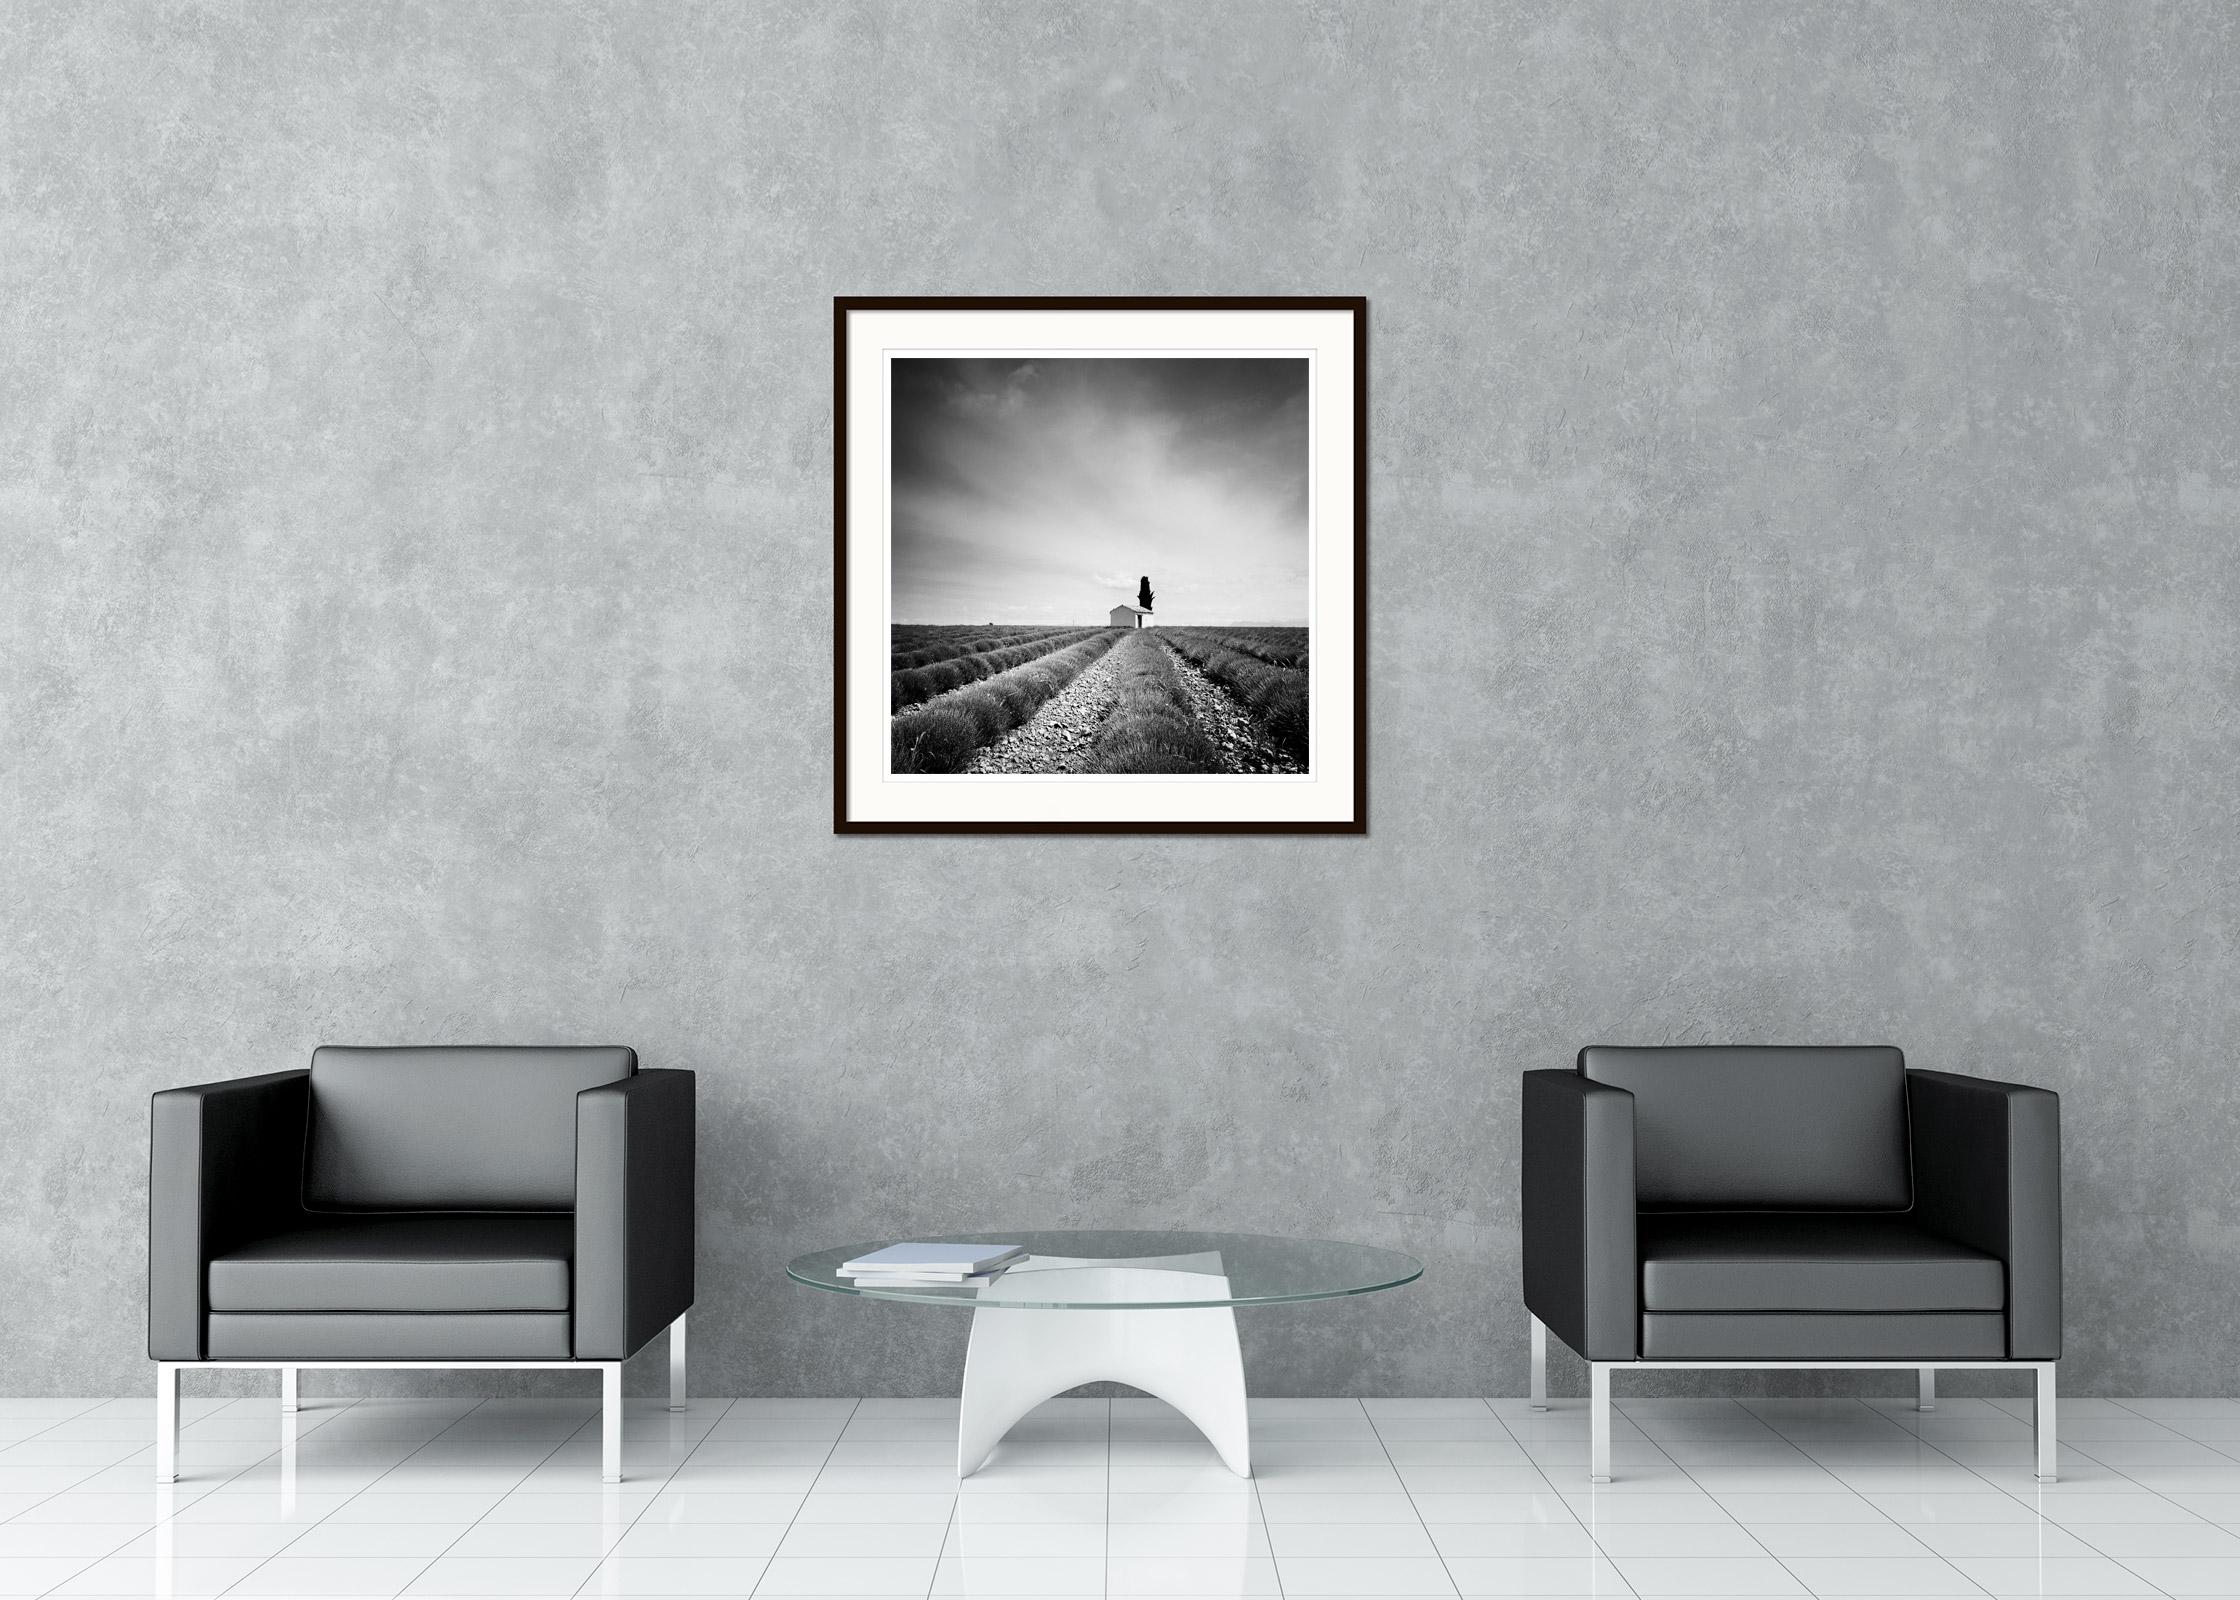 Black and White Fine Art panorama landscape photography. House with a single tree in the beautiful lavender field in the province of France. Archival pigment ink print, edition of 9. Signed, titled, dated and numbered by artist. Certificate of